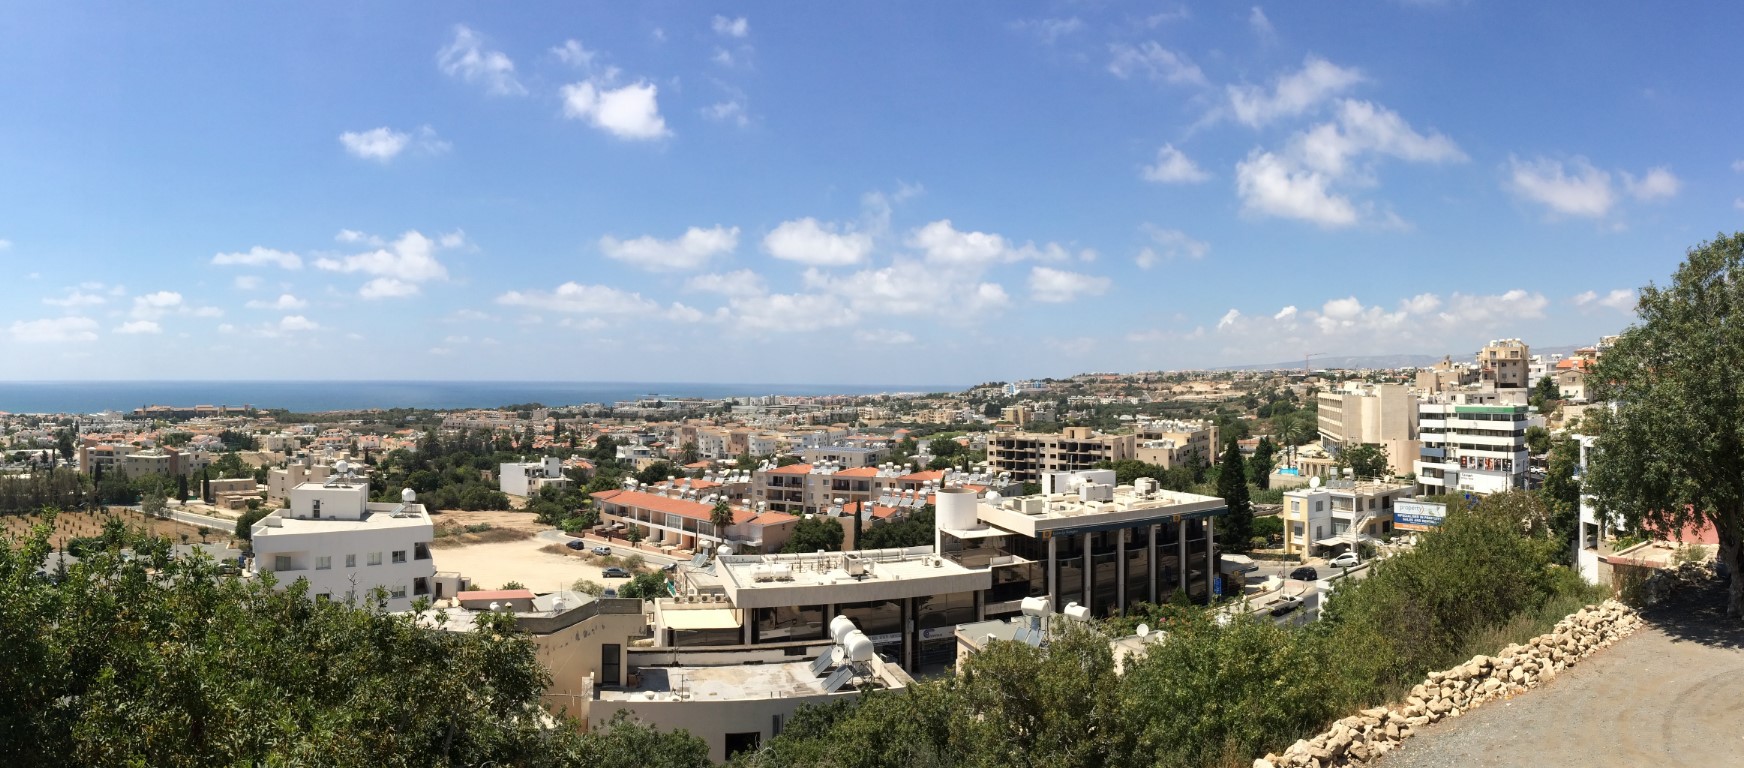 image Paphos chamber of commerce pleased with economic performance in 2022